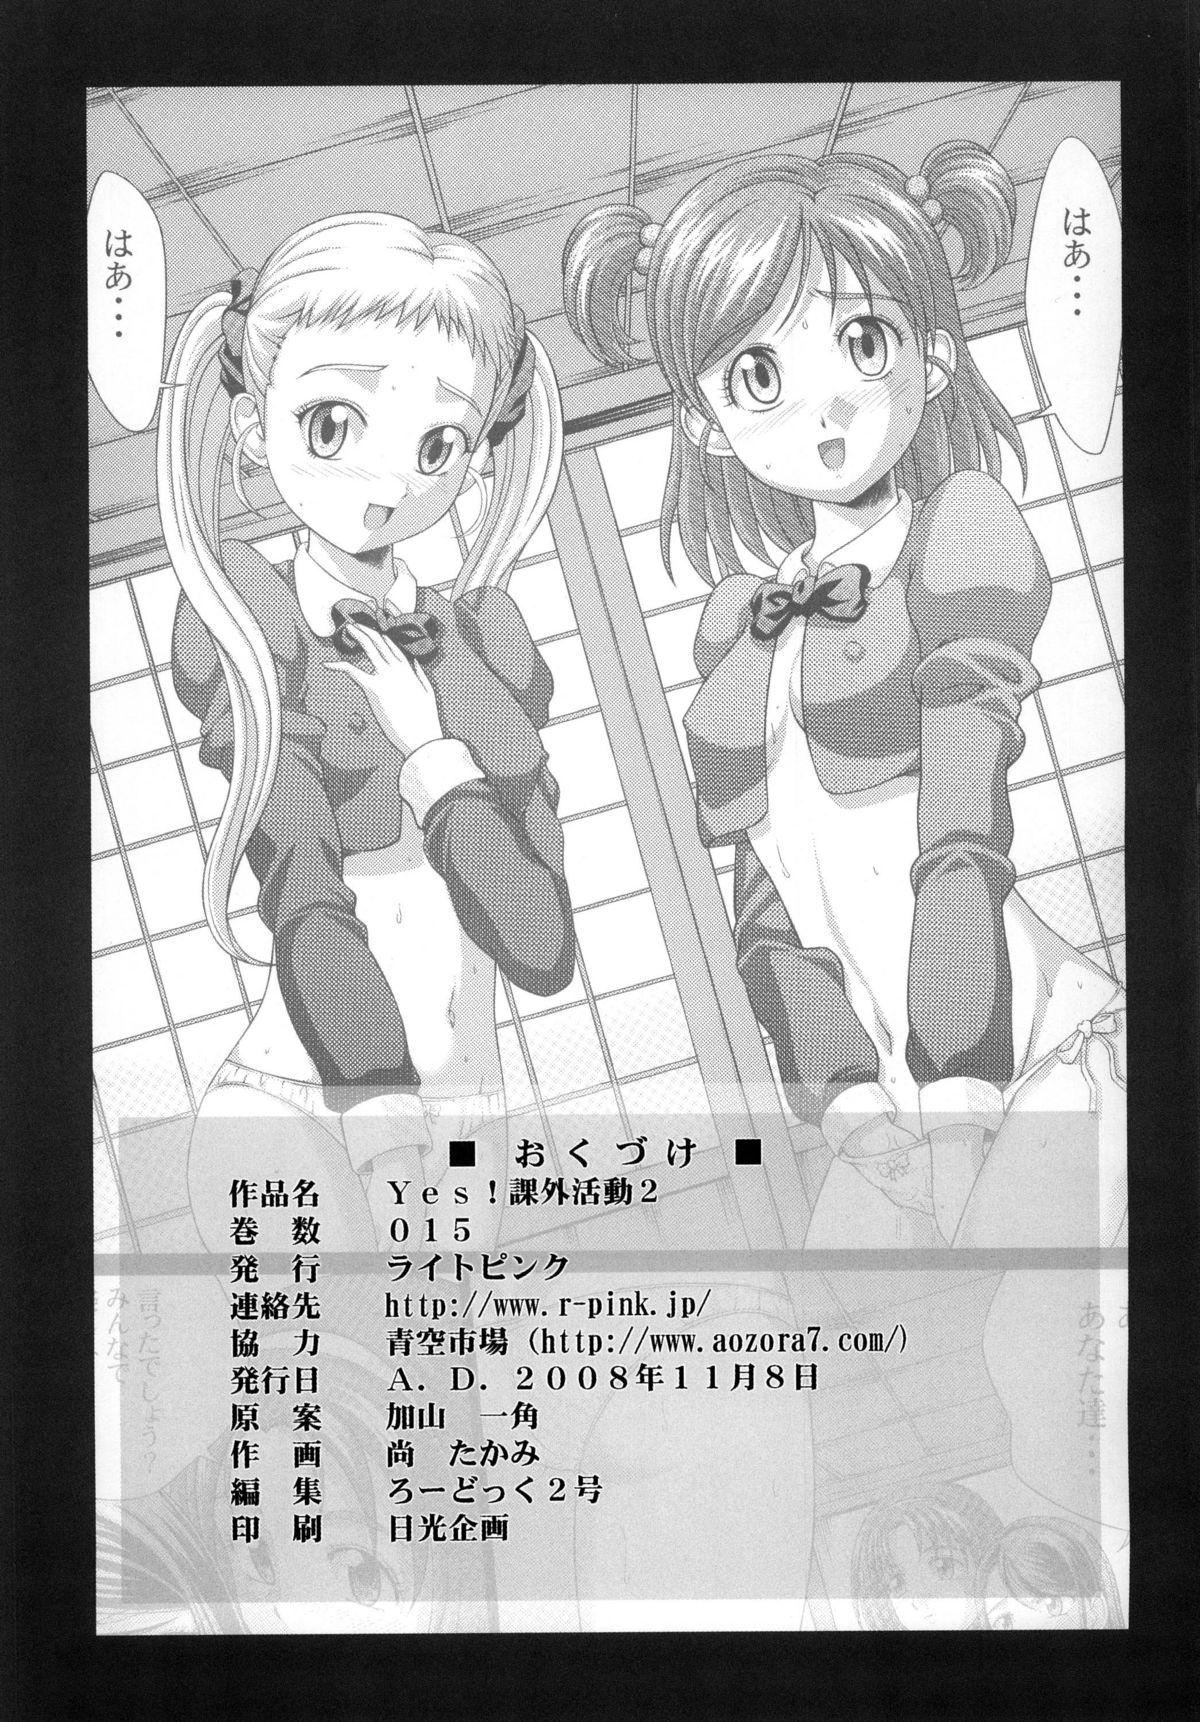 Punish YES! Yes! Kagai Katsudou 2 - Pretty cure Yes precure 5 Ano - Page 23